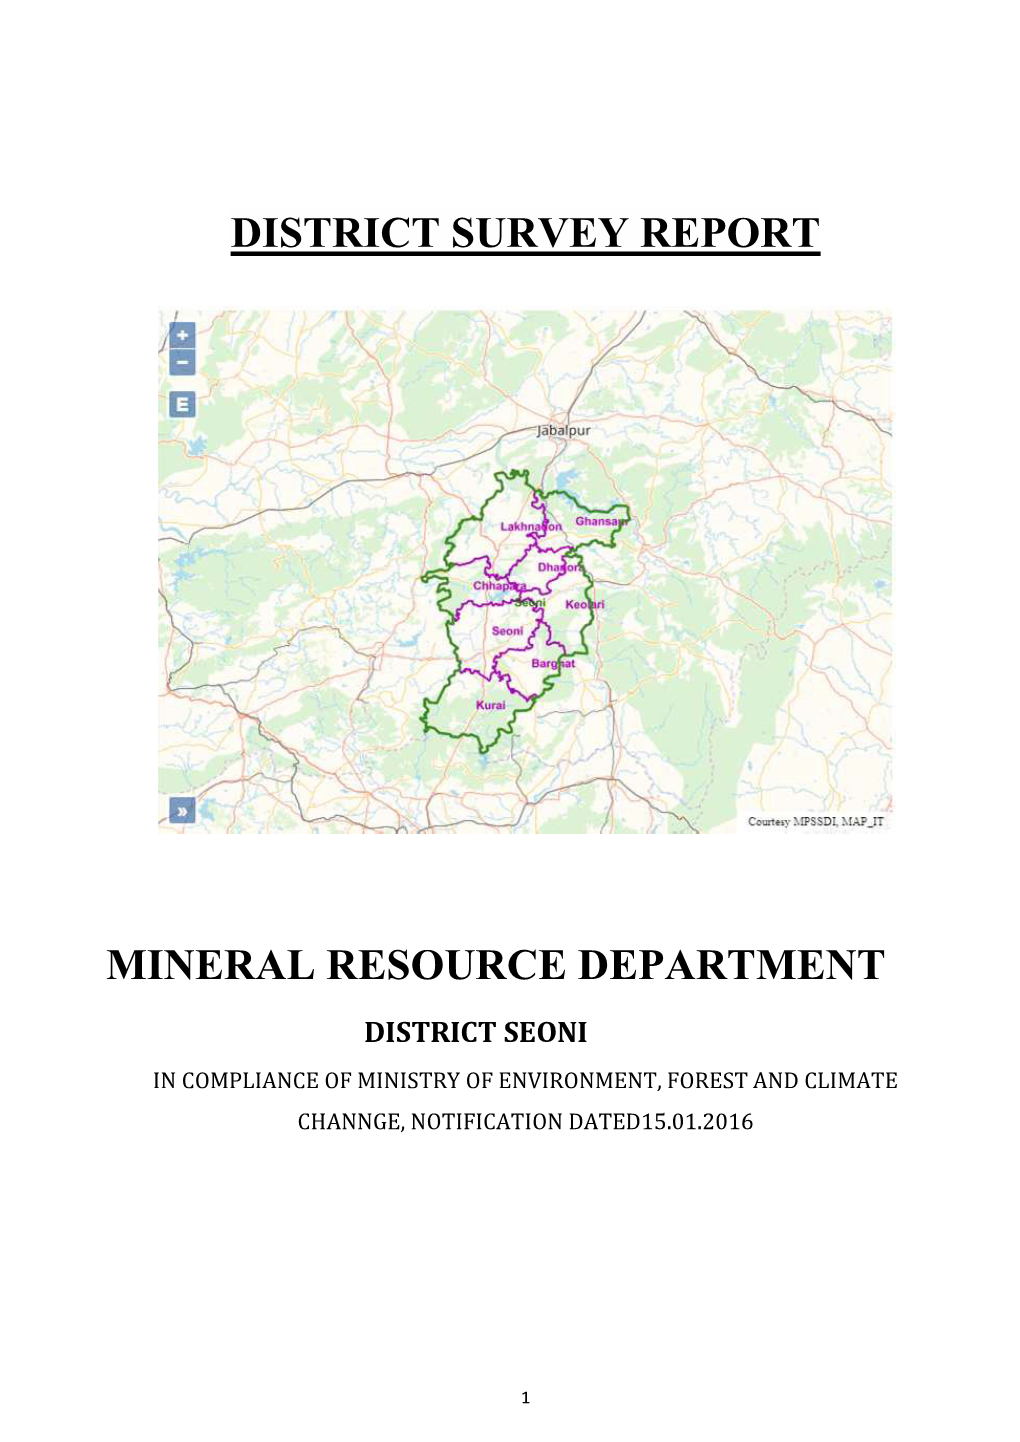 District Survey Report Mineral Resource Department